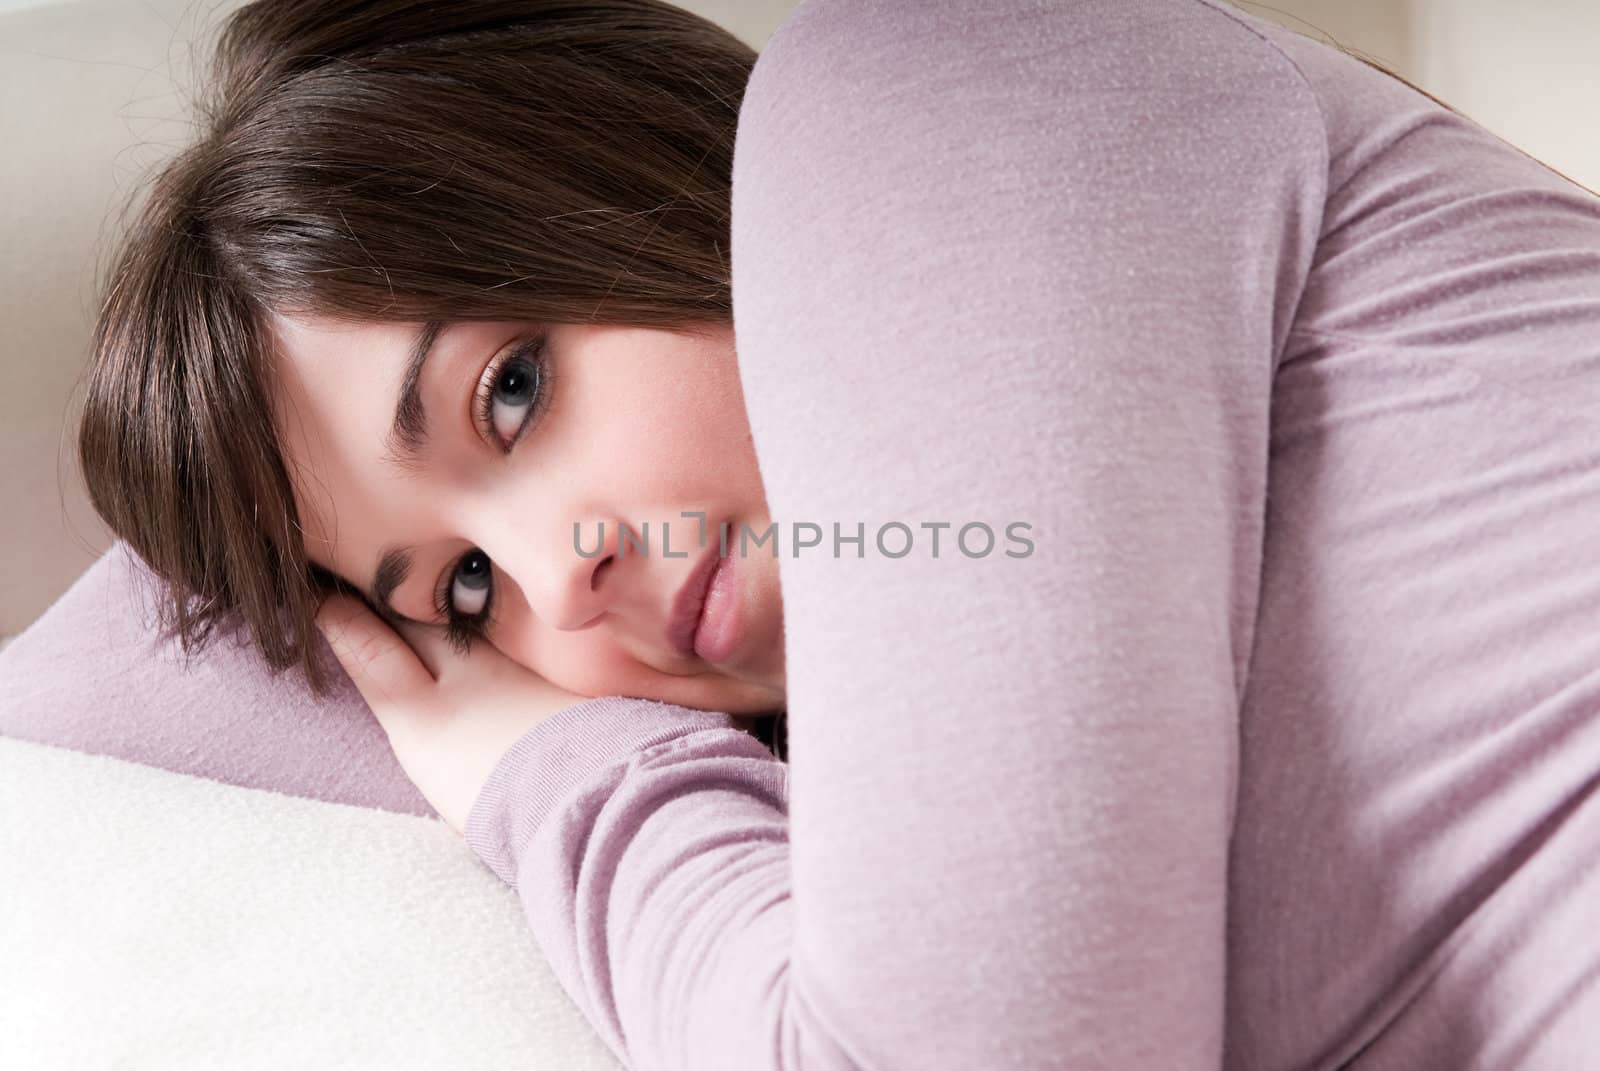 Young woman portrait "relax" lying on couch. 